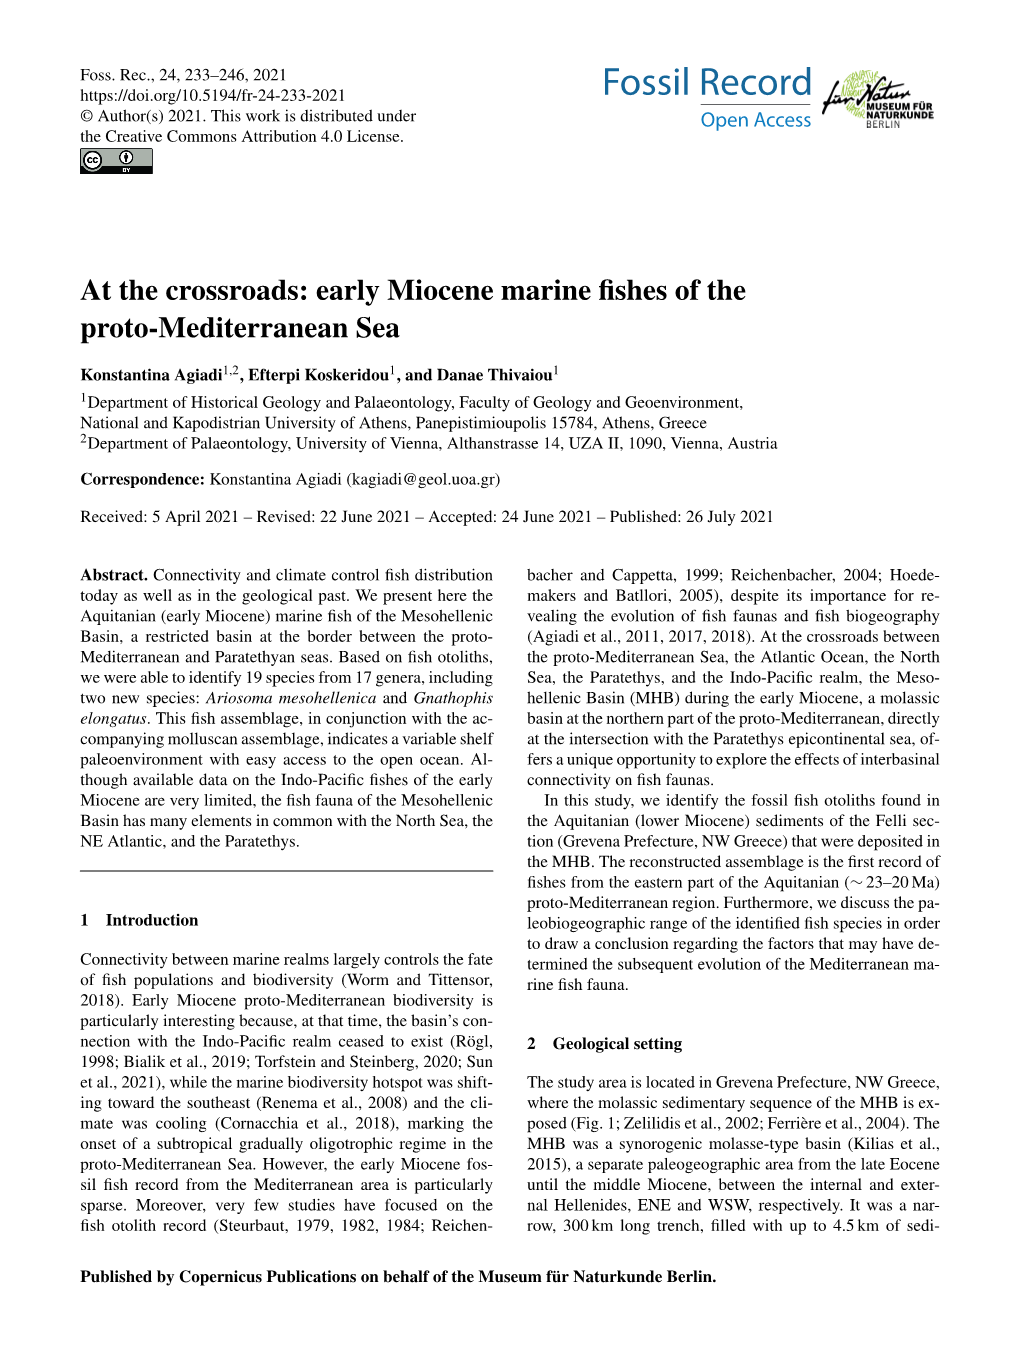 At the Crossroads: Early Miocene Marine Fishes of the Proto-Mediterranean